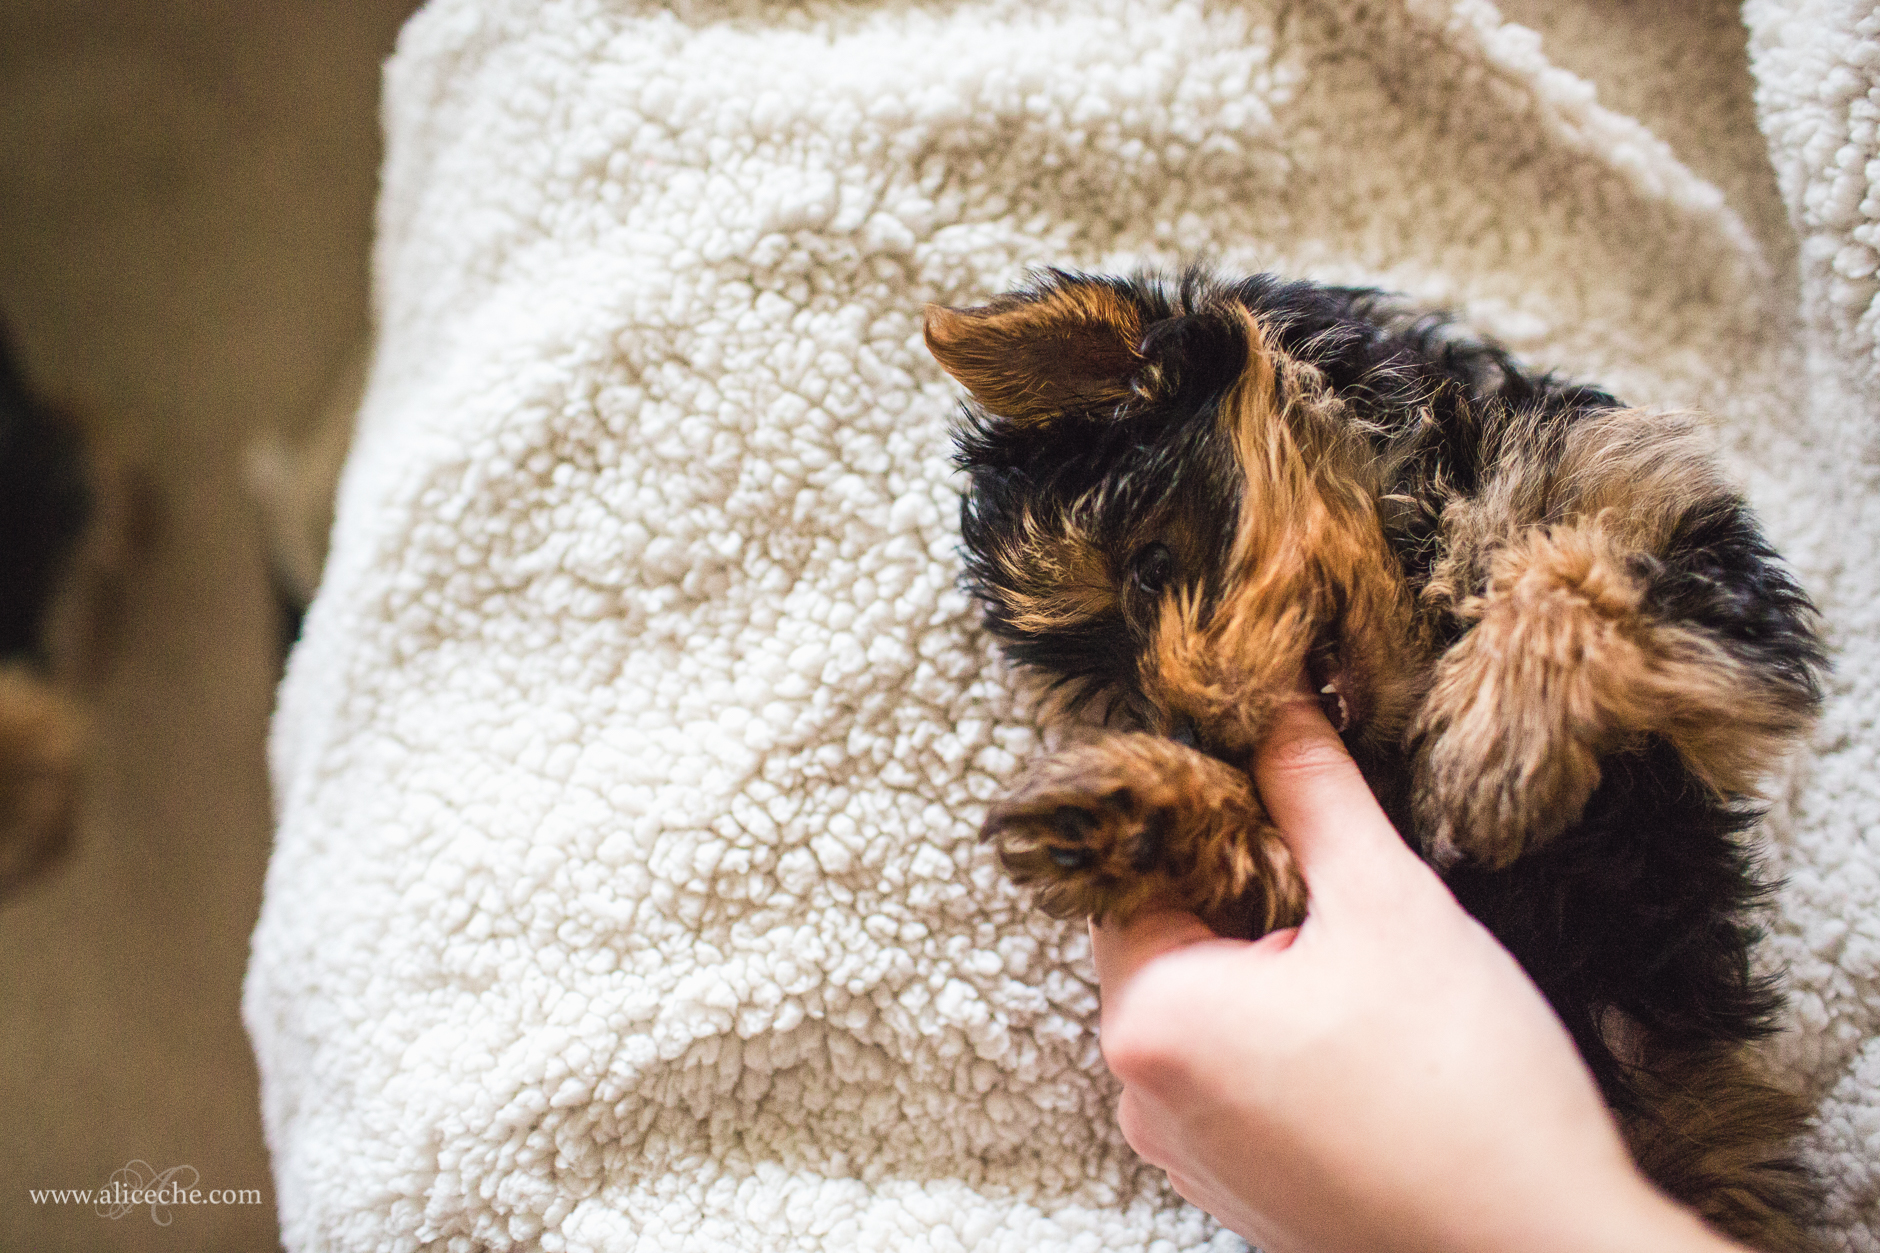 alice-che-photography-yorkshire-terrier-puppy-biting-thumb